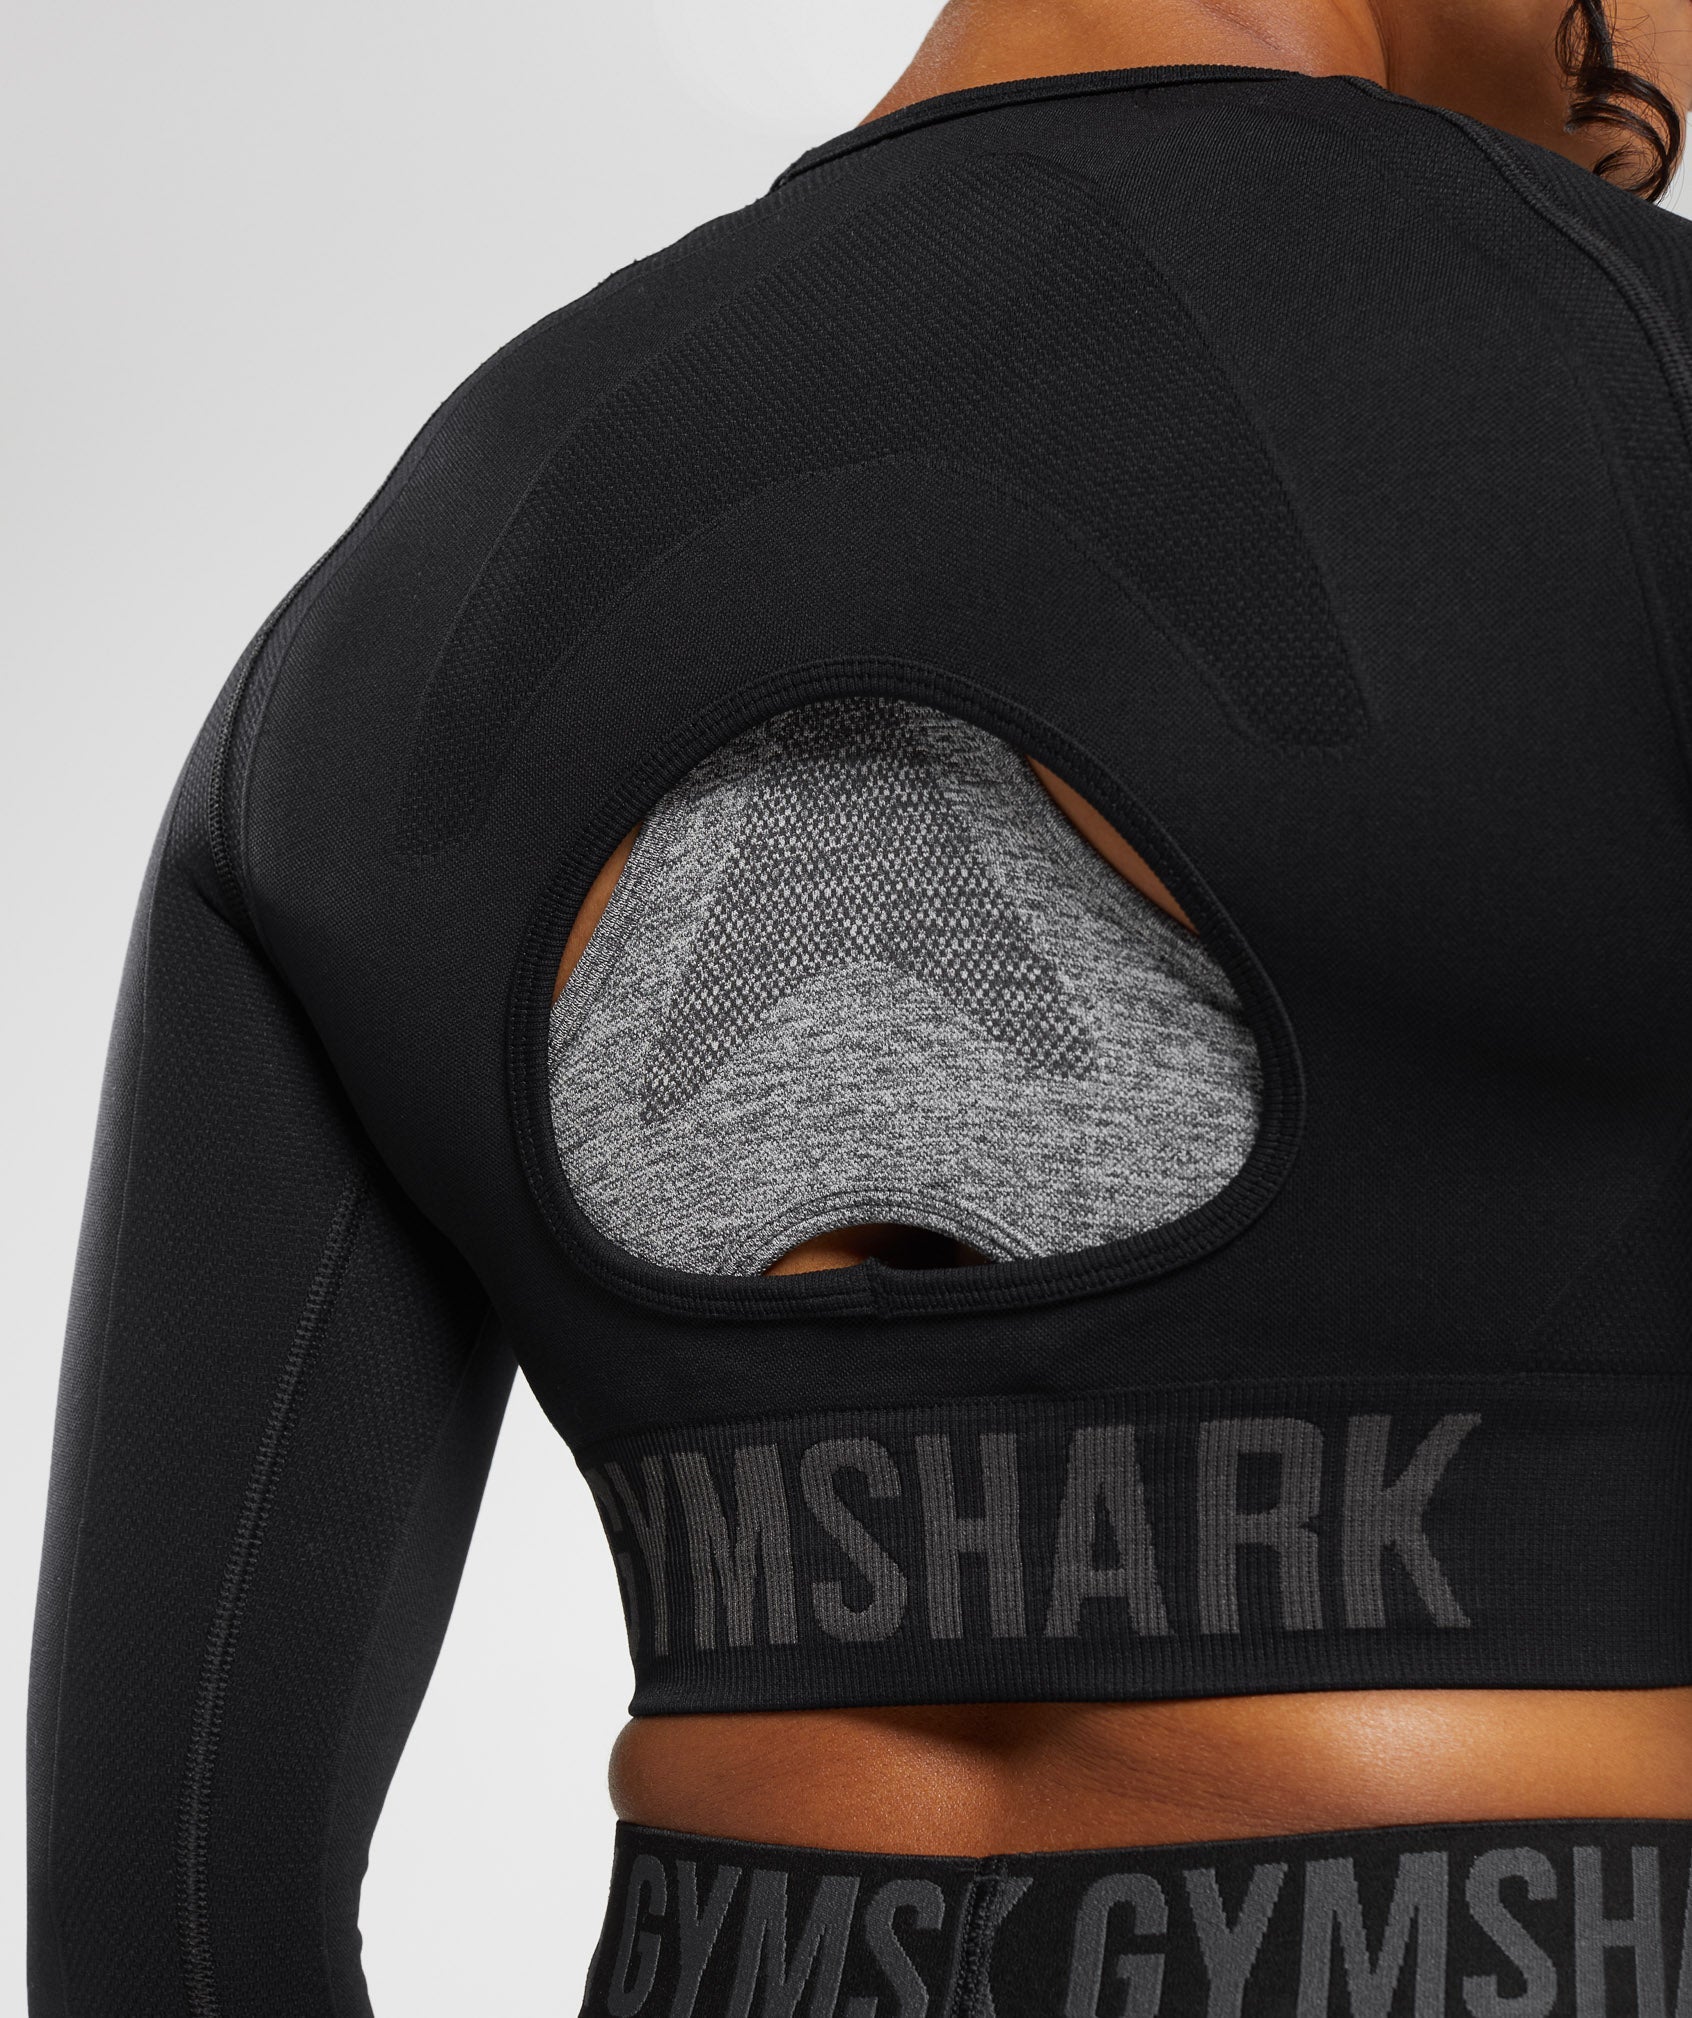 Gymshark Long Sleeve Ribbon Crop Top Blue - $25 (28% Off Retail) - From  Bailey